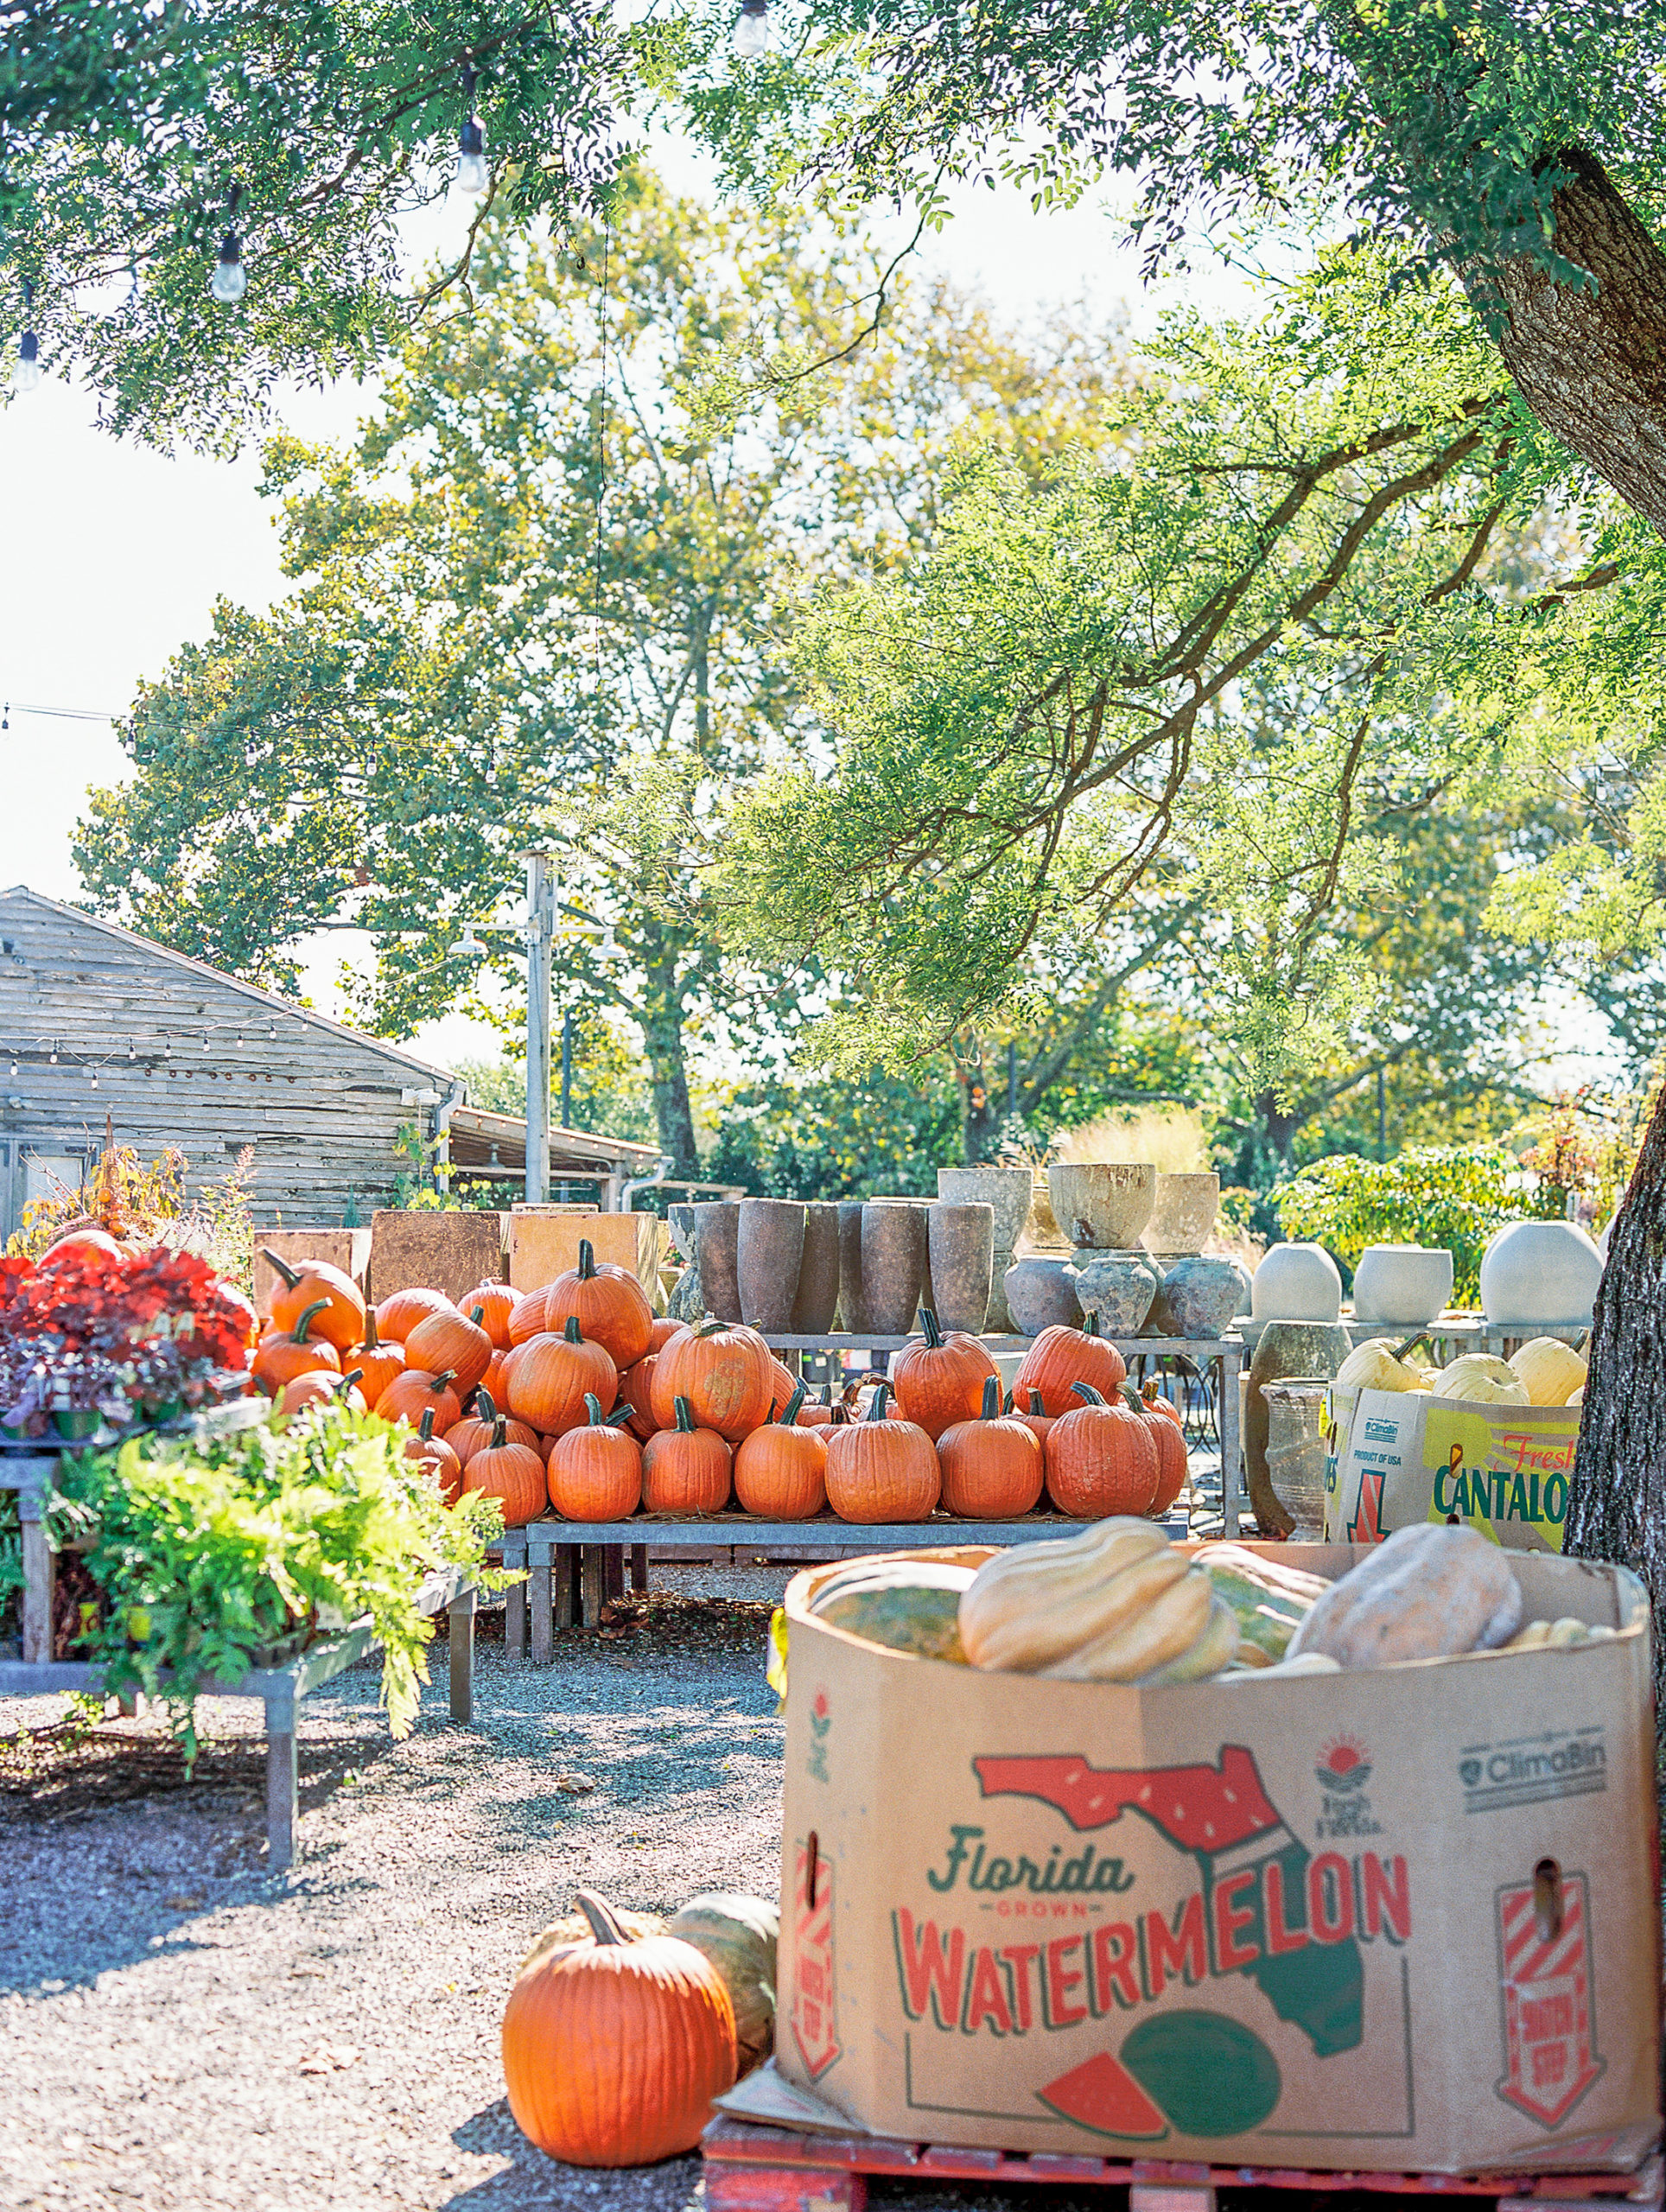 Terrain's outdoor shop of pumpkins. squash, and planters for Terrain at Styer's Wedding